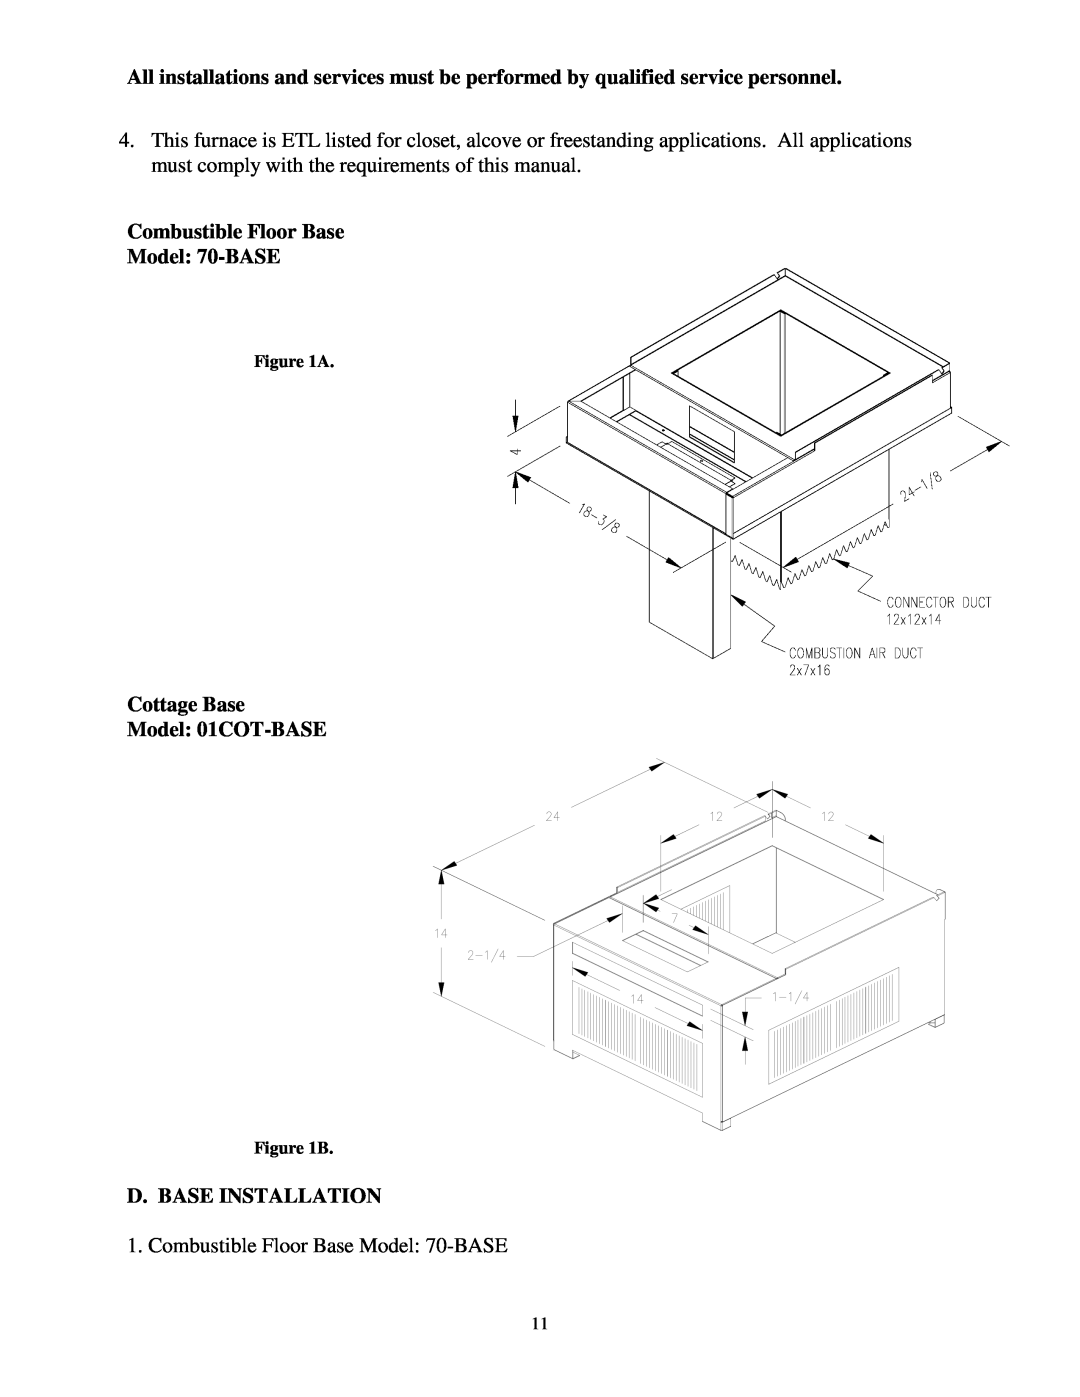 Thermo Products ome-72d36 Combustible Floor Base Model 70-BASE, Cottage Base Model 01COT-BASE, D. Base Installation 